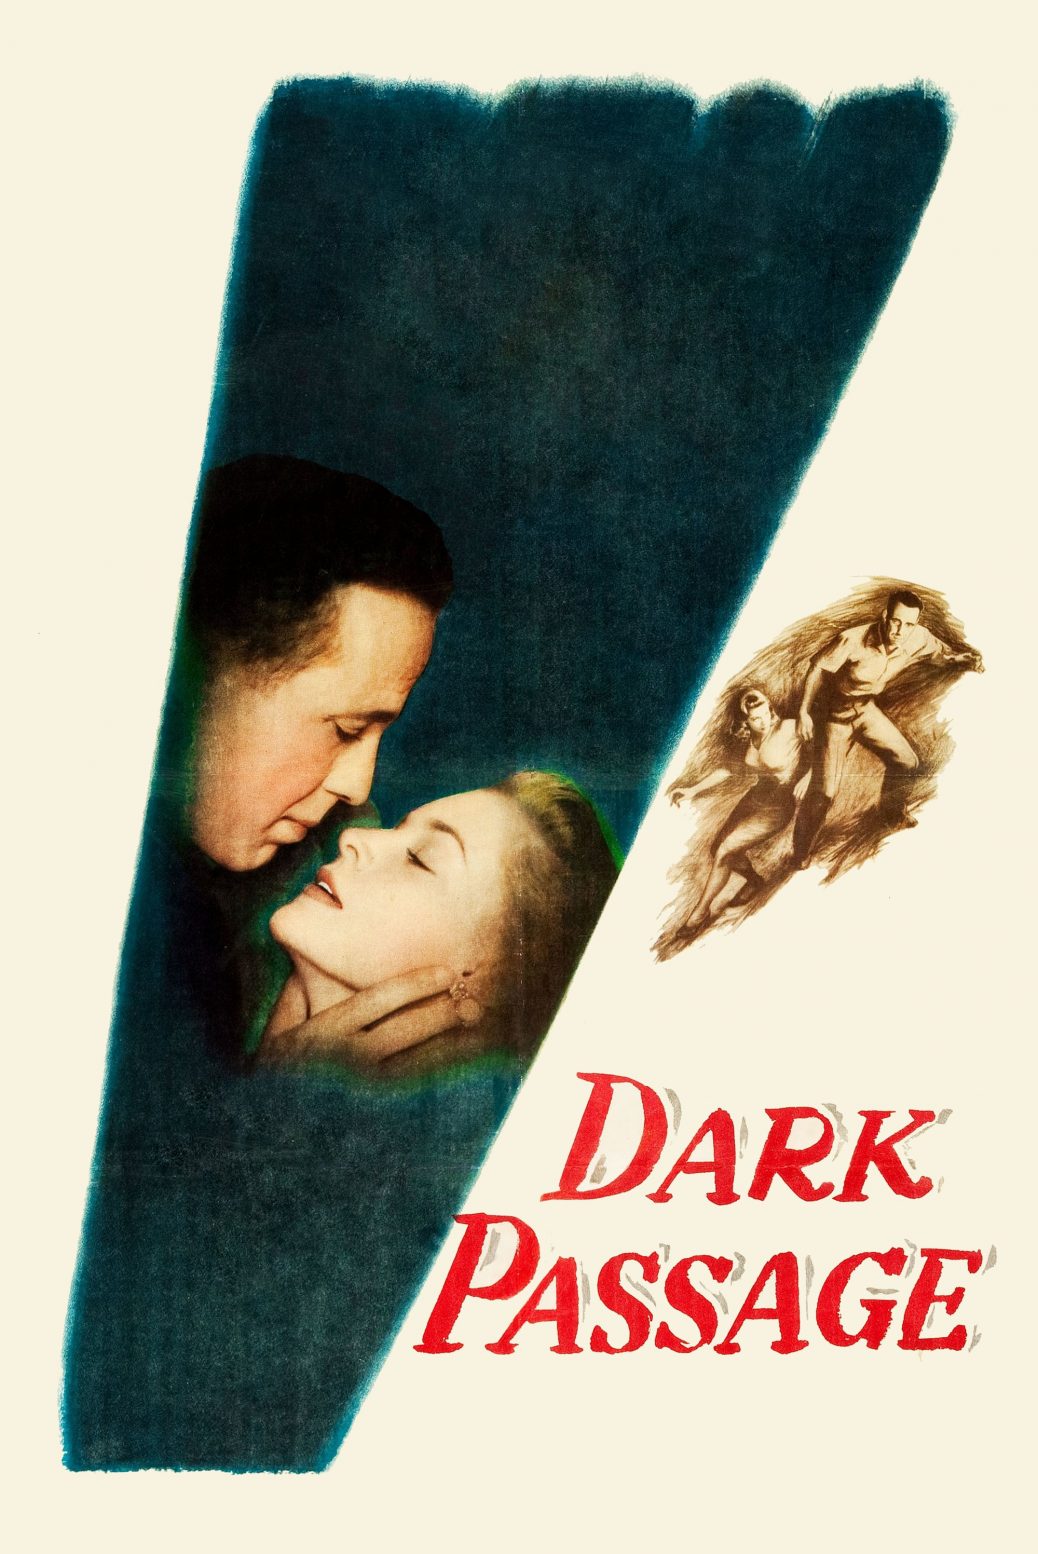 Poster for the movie "Dark Passage"